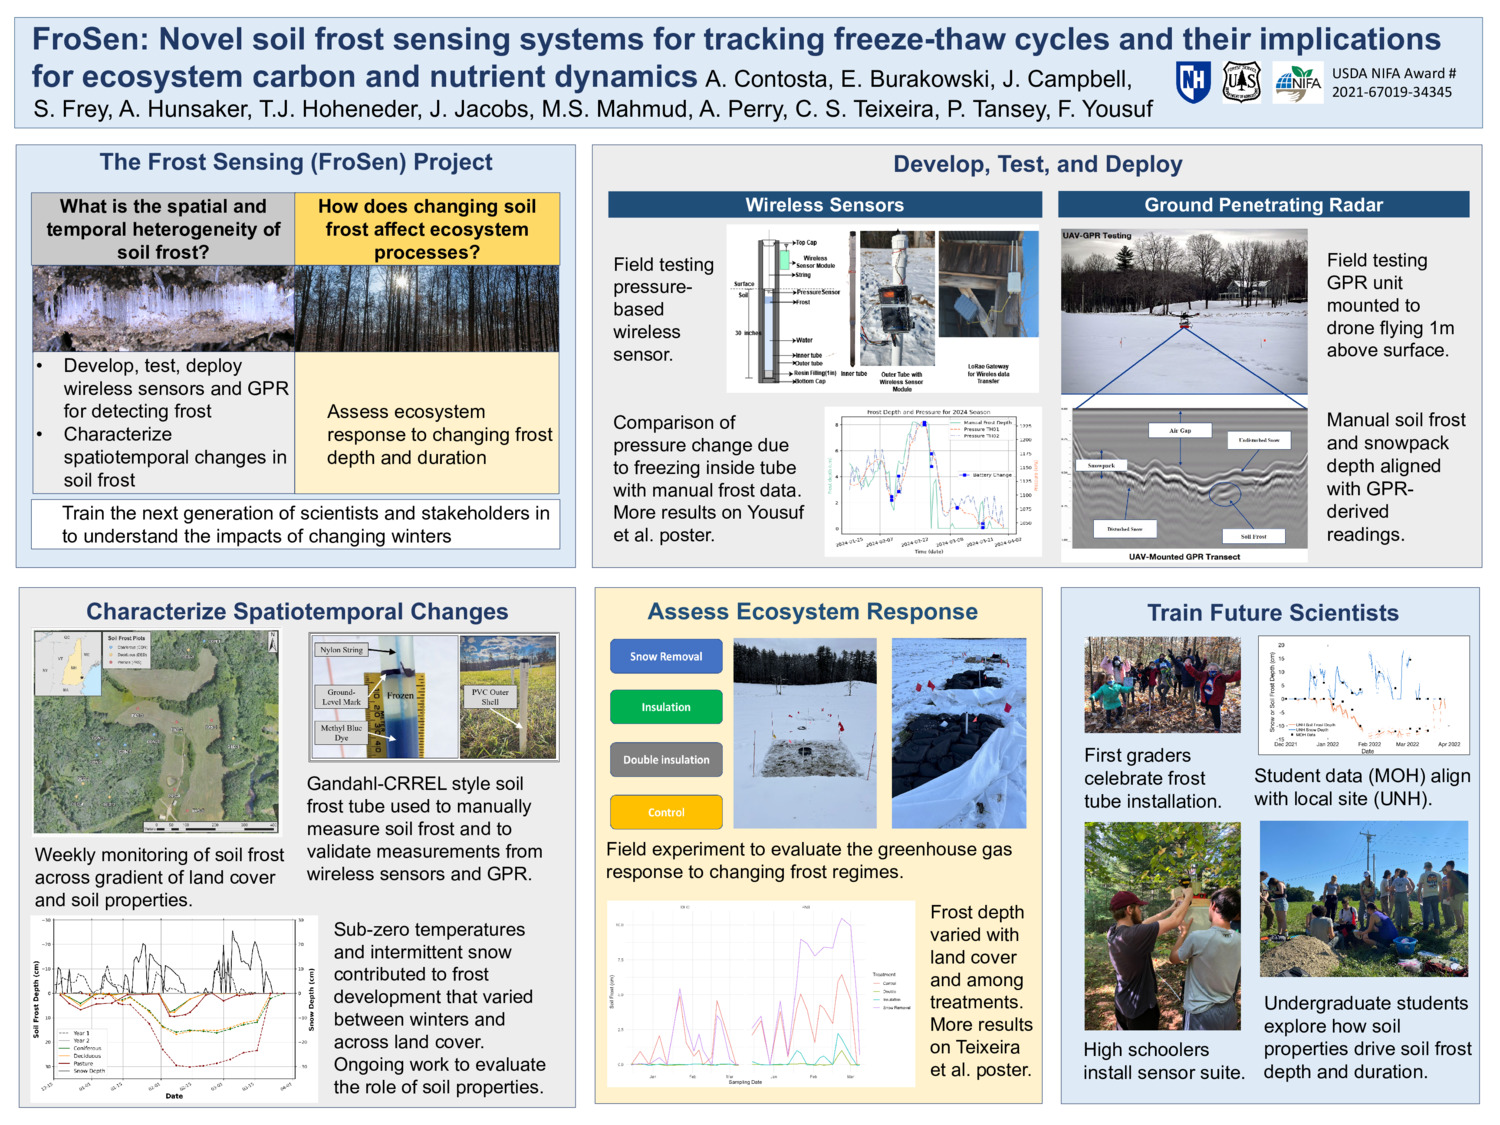 Frosen: Novel Soil Frost Sensing Systems For Tracking Freeze-Thaw Cycles And Their Implications For Ecosystem Carbon And Nutrient Dynamics by Contosta